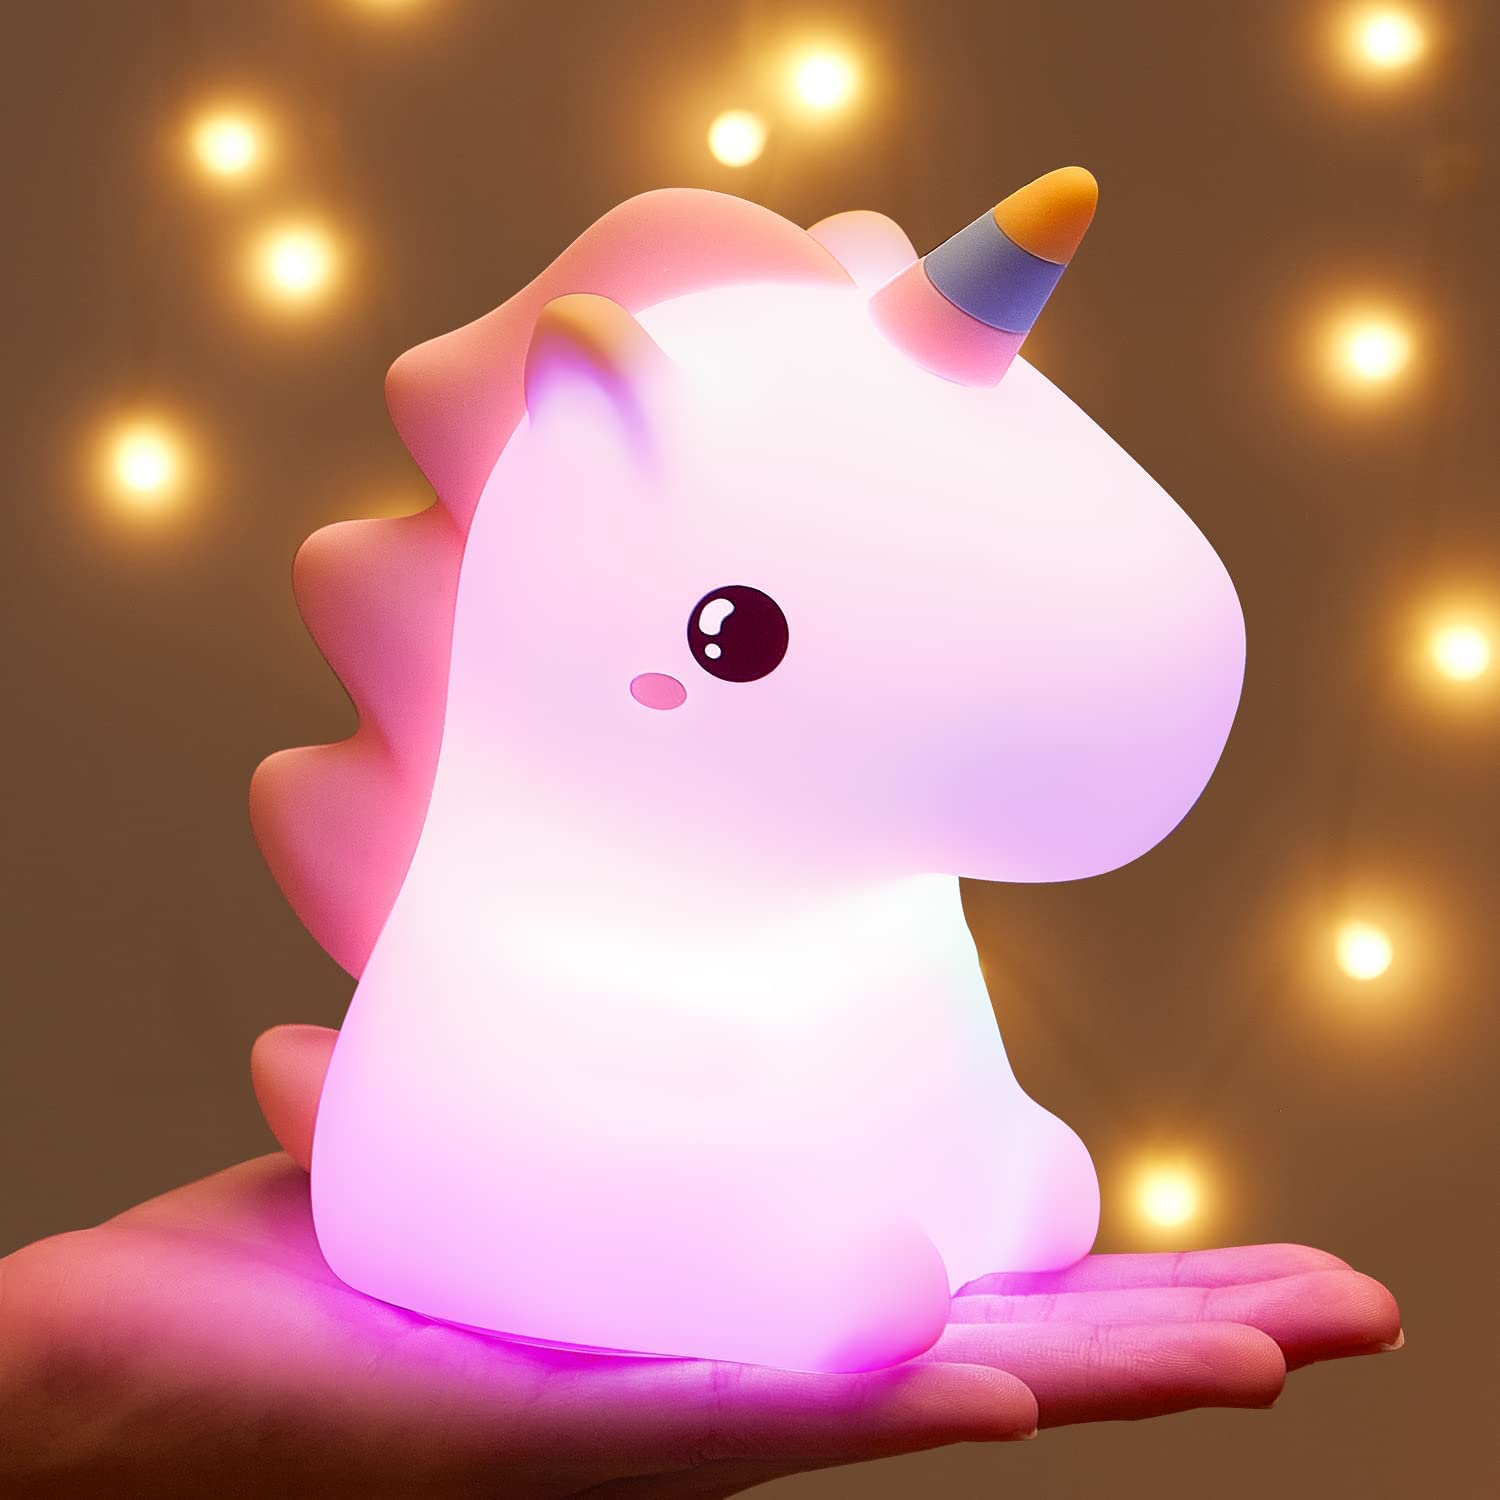 Kawaii Night Light Kids Unicorn Gifts for Girls, 16 Colour Changing Baby Night Light, Baby Girl Gift Battery Led Night Light, Cute Gifts Night Lamp Nightlight for Babies Bedroom Decor Cute Room Decor